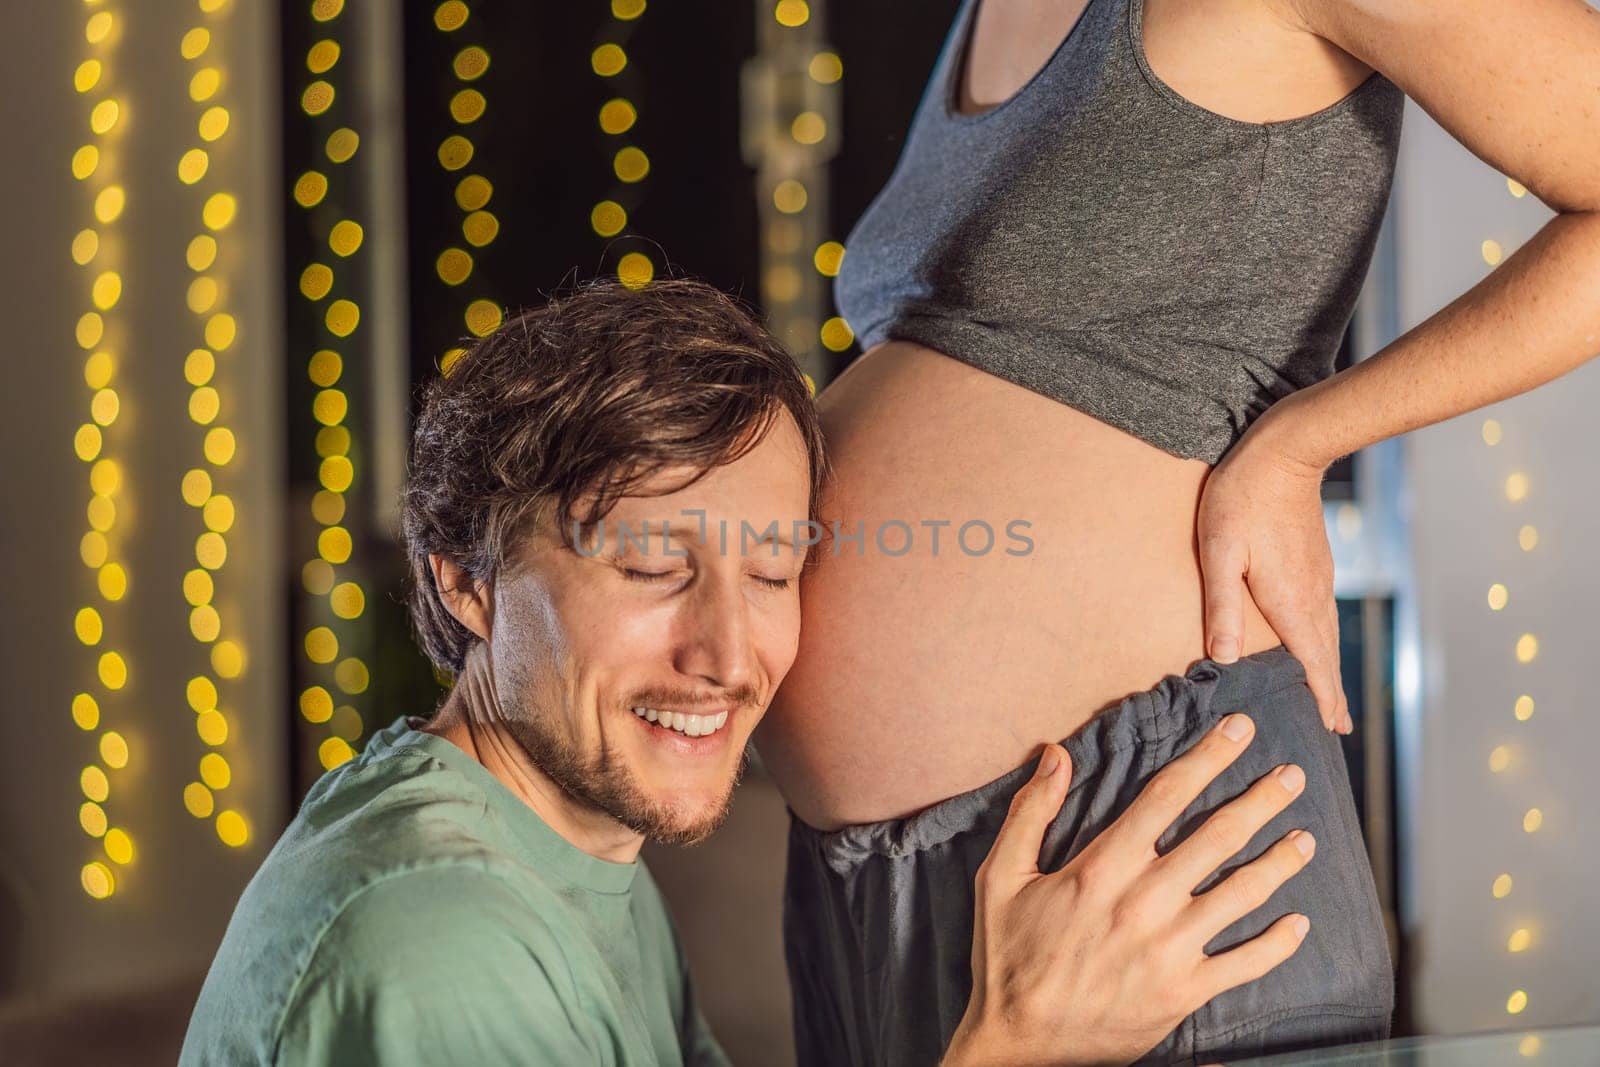 In a tender holiday moment, a husband kisses his wife's pregnant belly, expressing love and anticipation for the Christmas joy to come.